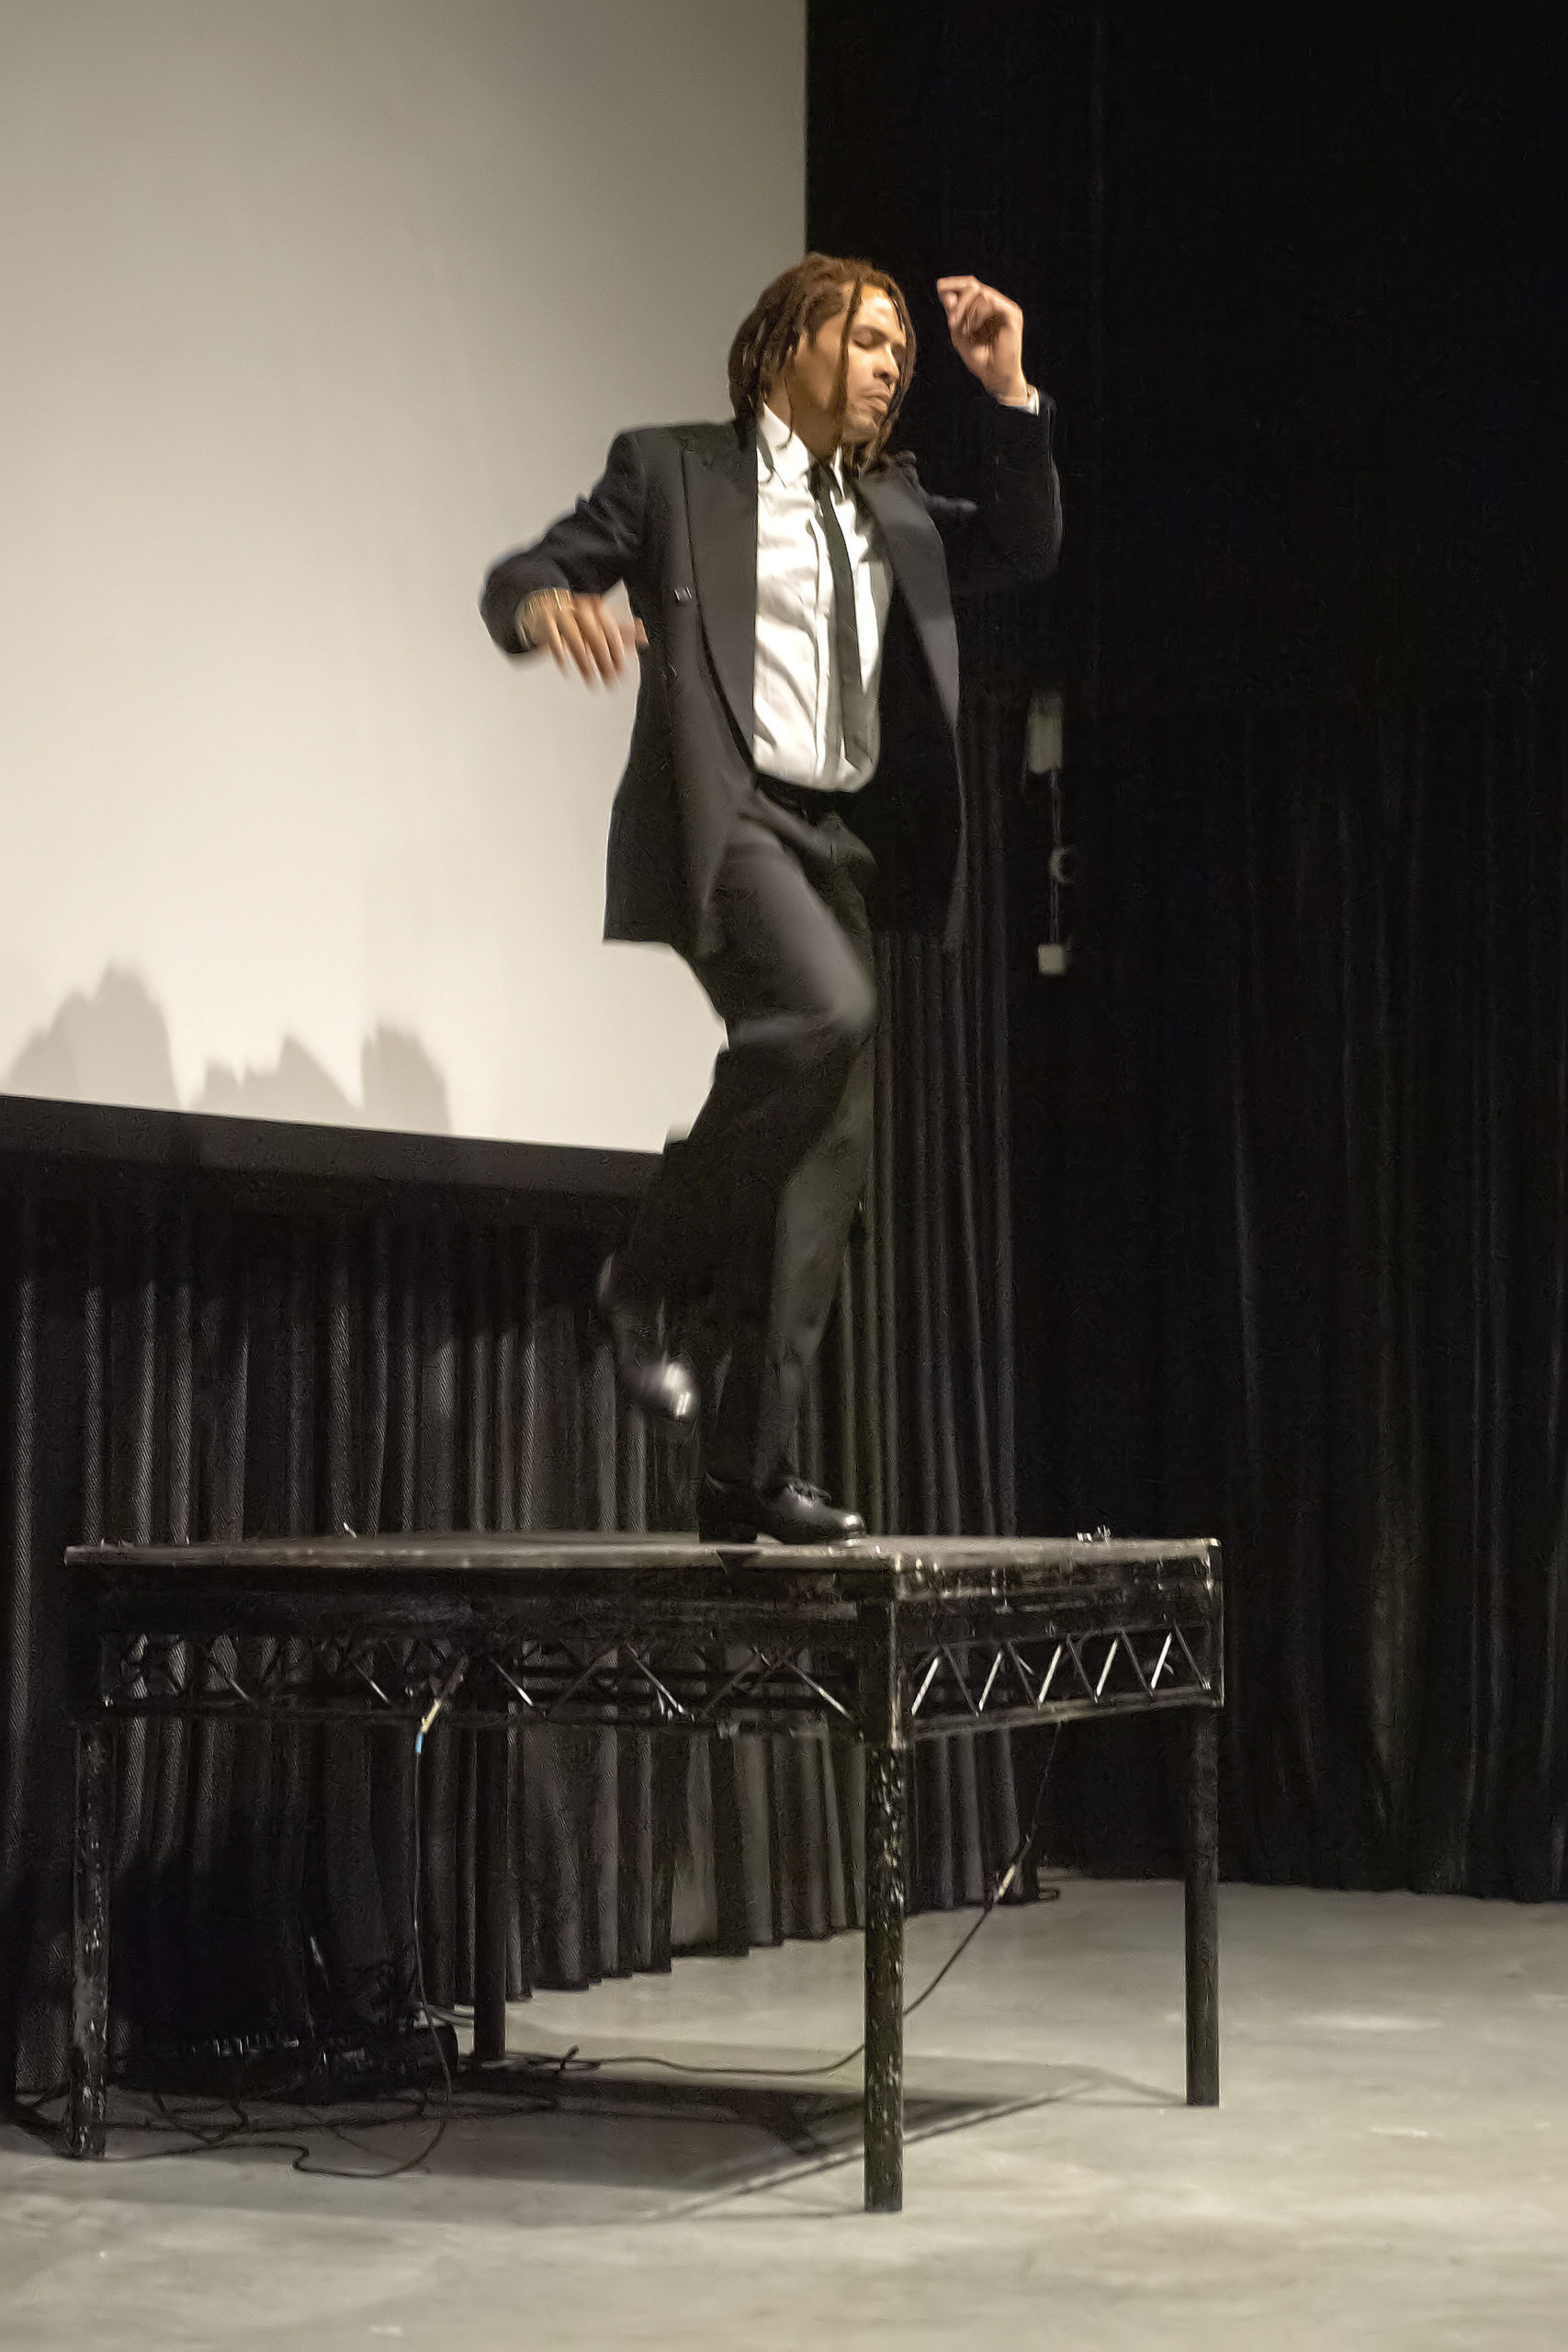 Tap-dancing legend Omar Edwards performs a solo during the 